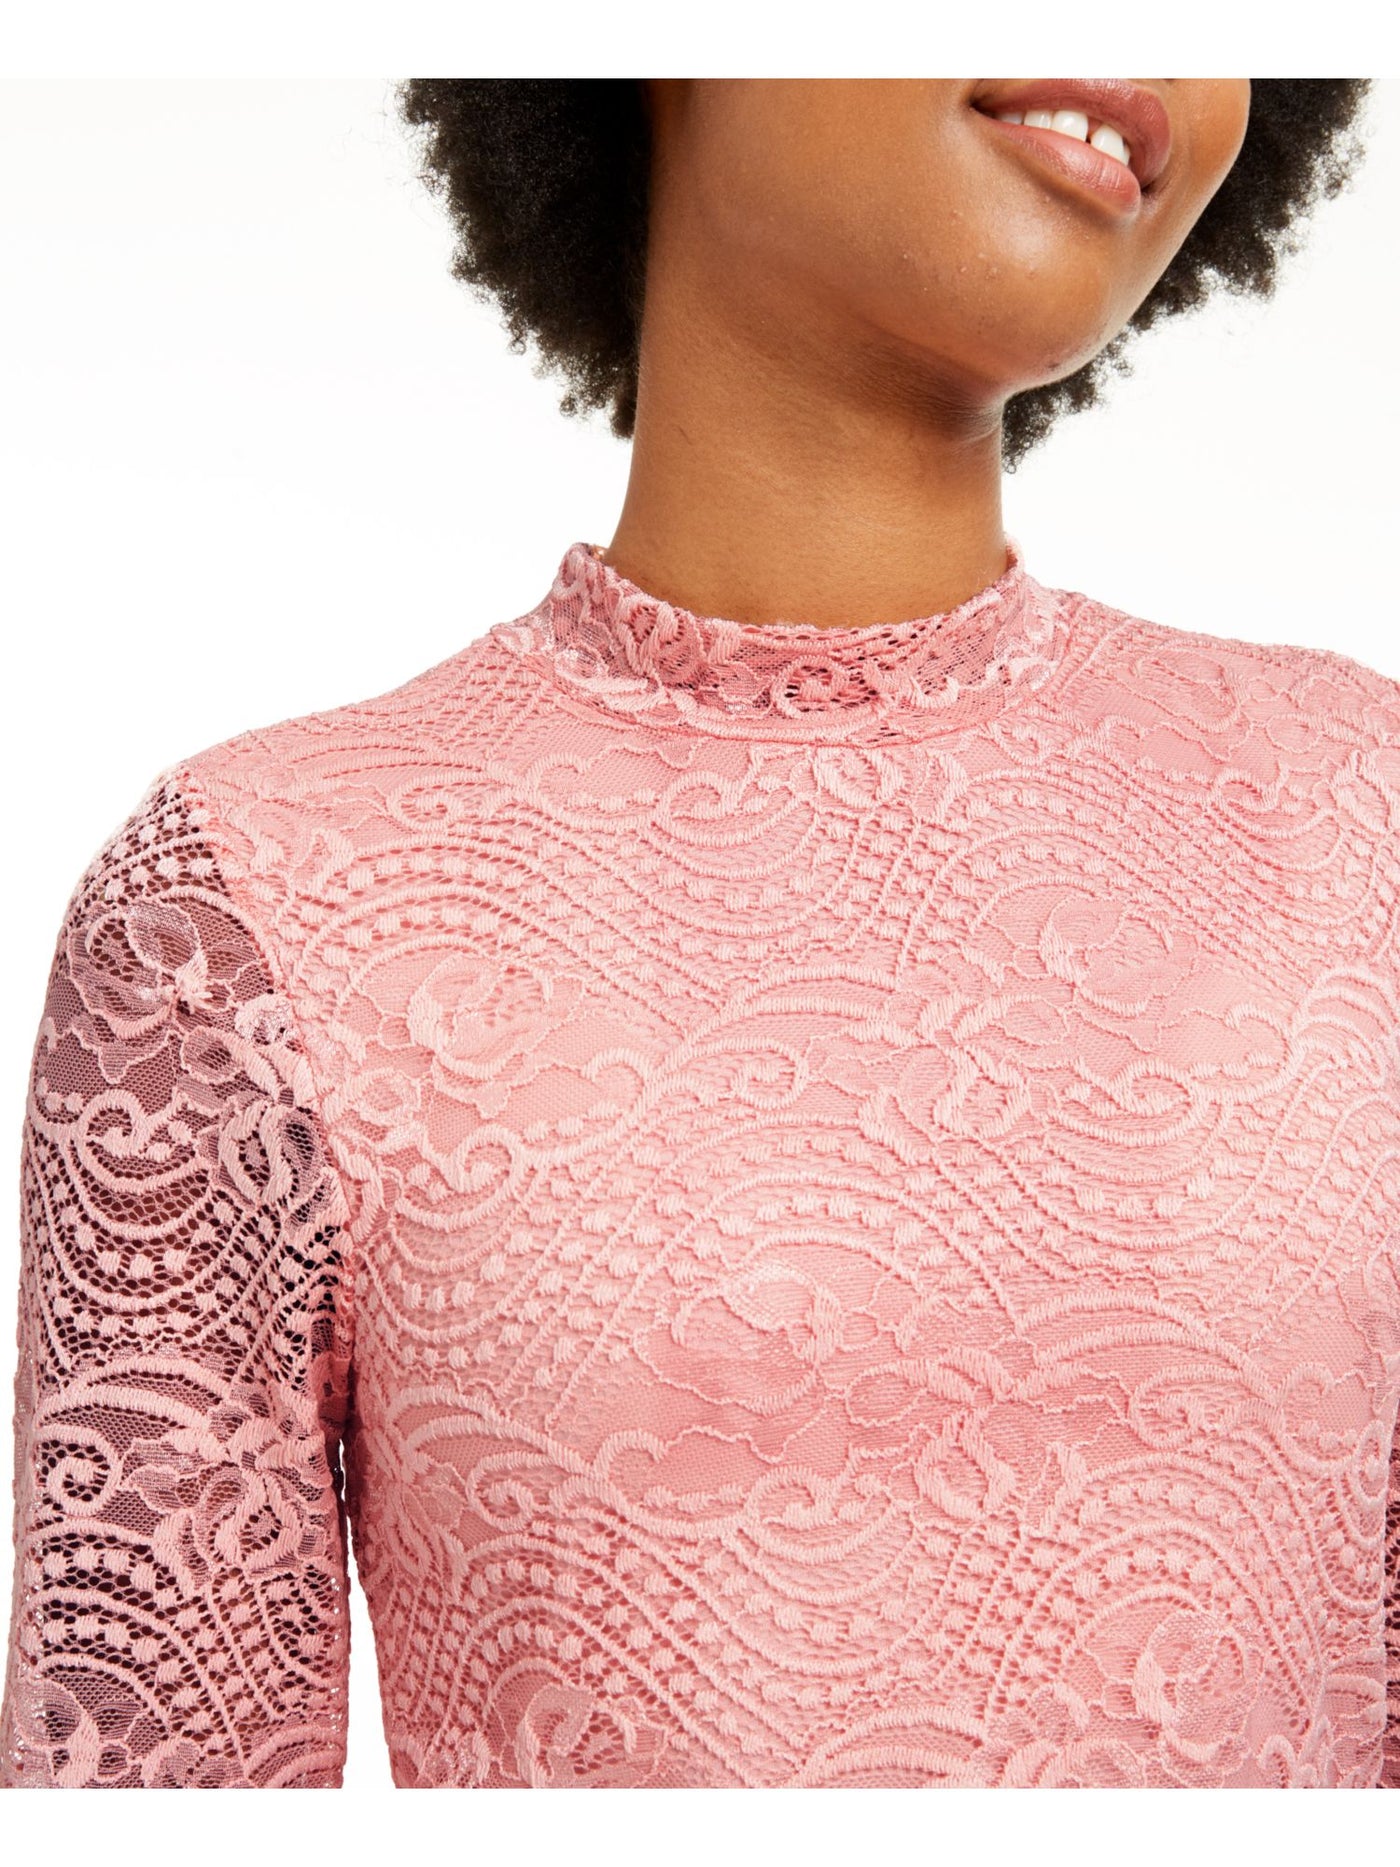 CRAVE FAME Womens Pink Lace Long Sleeve Crew Neck Top Juniors XS